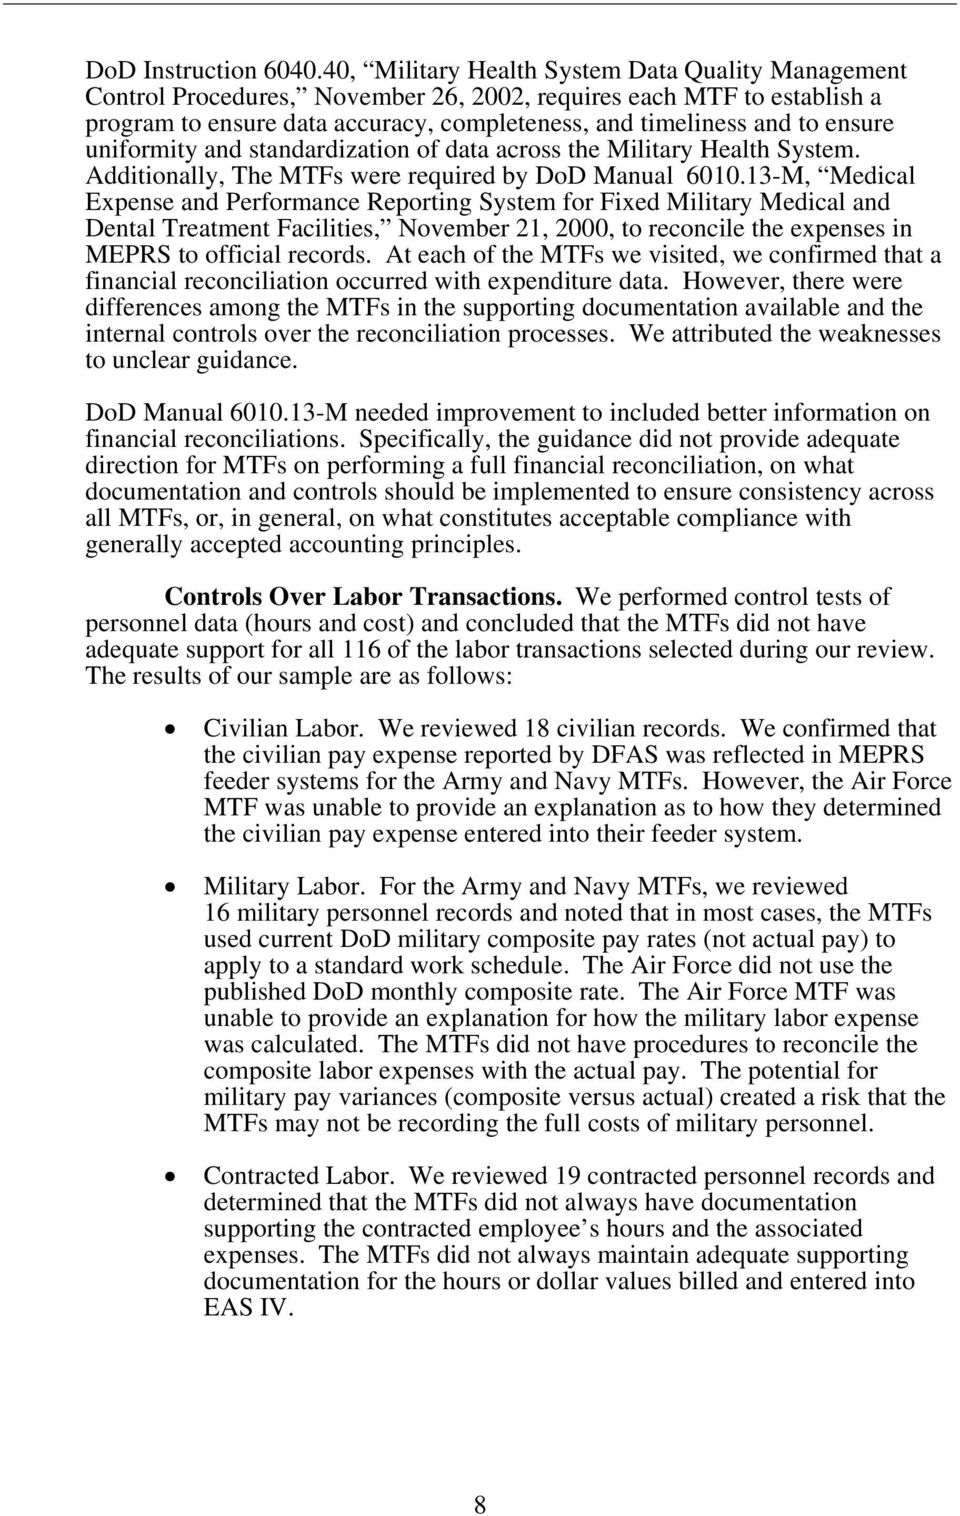 uniformity and standardization of data across the Military Health System. Additionally, The MTFs were required by DoD Manual 6010.